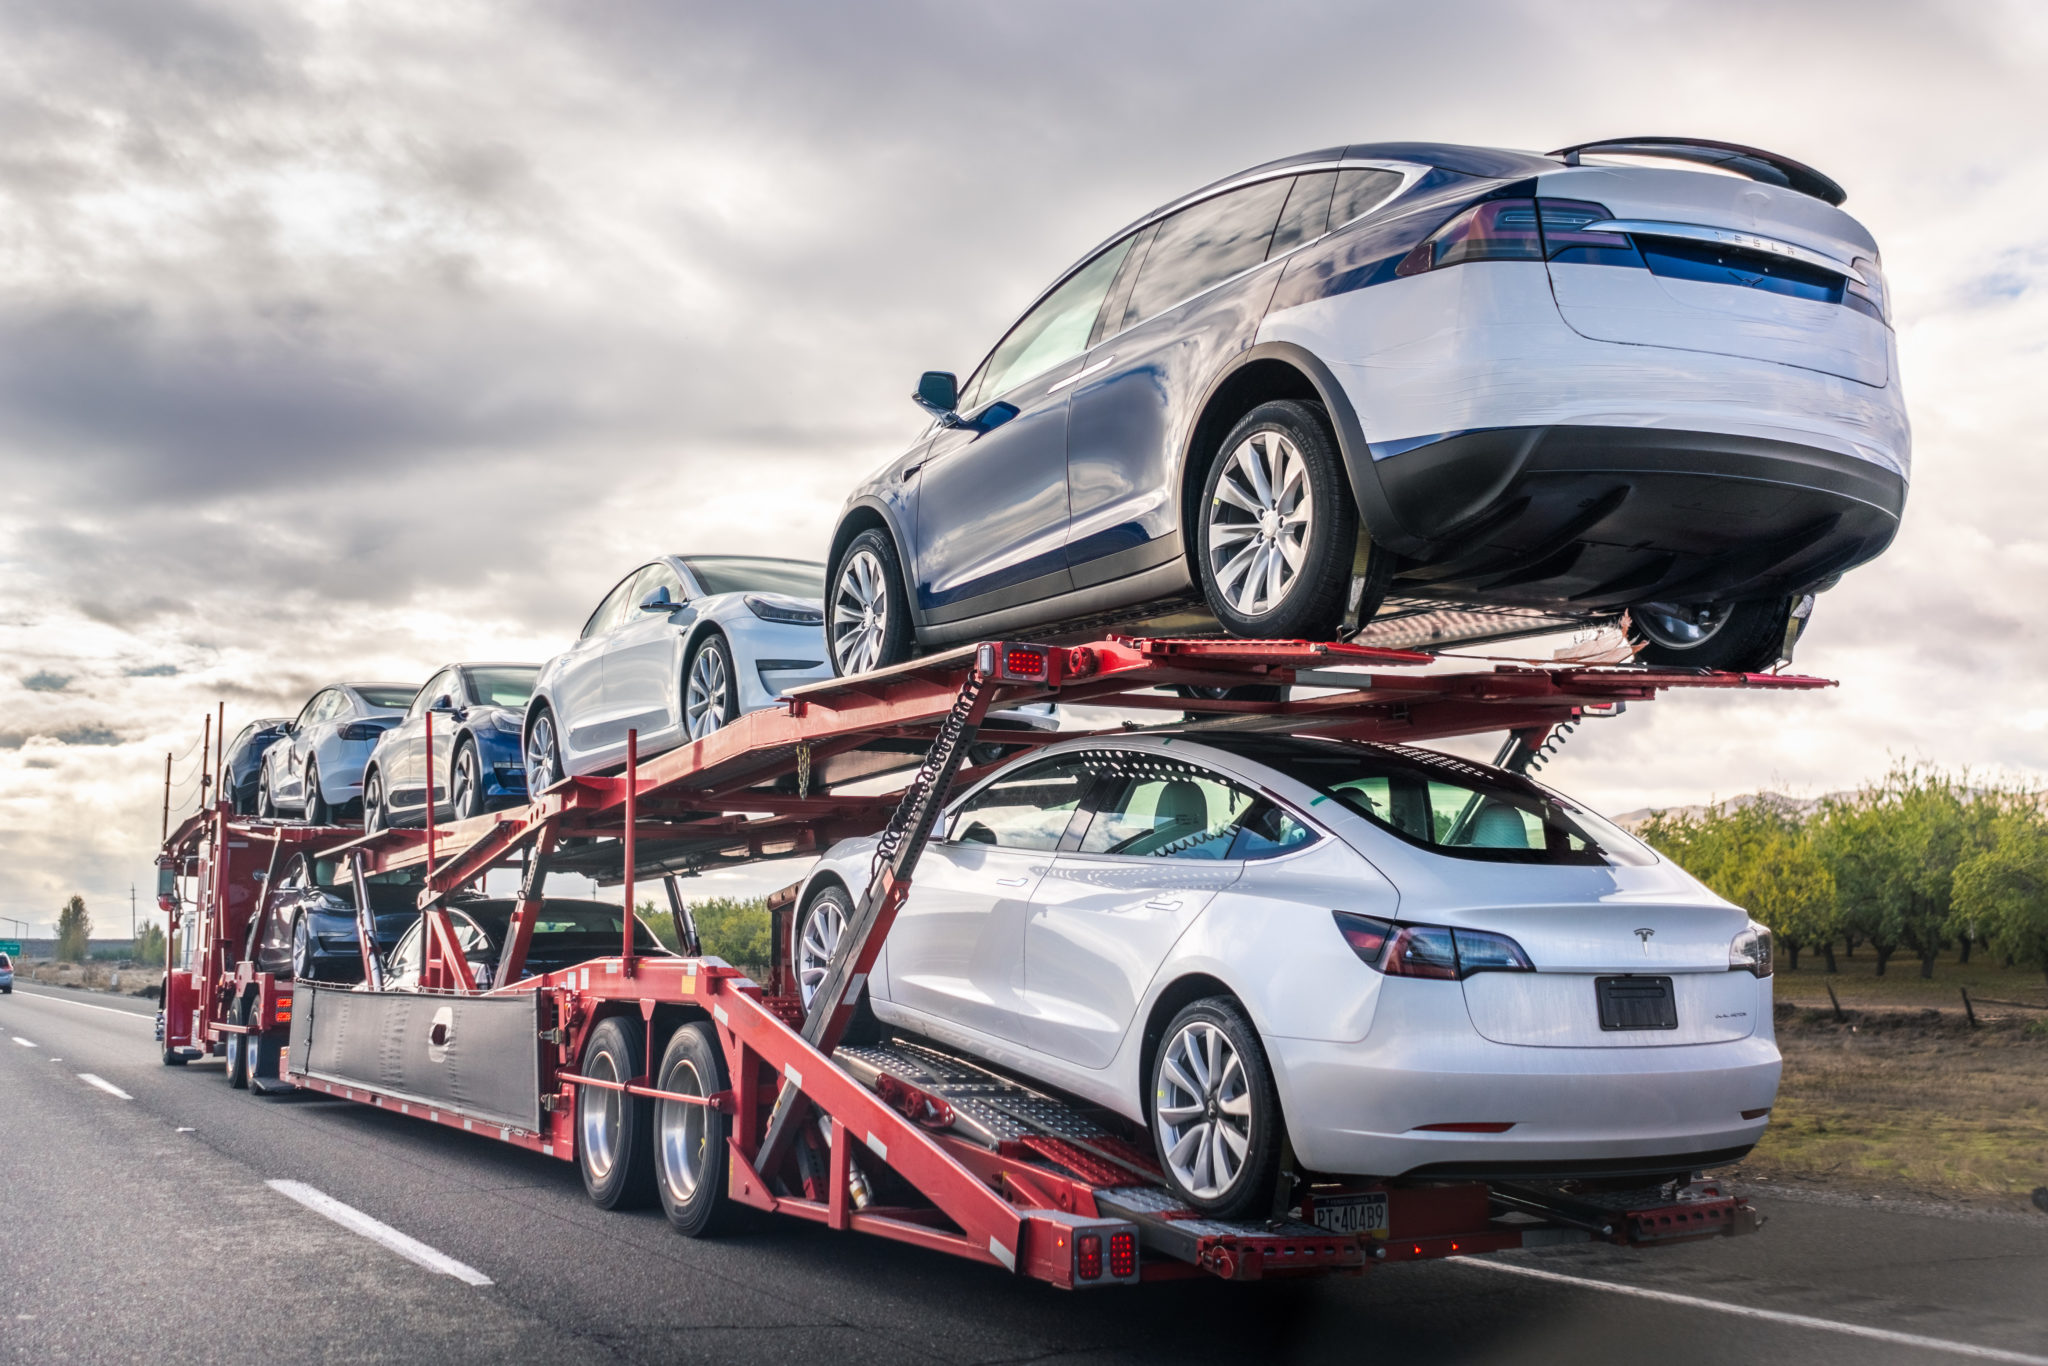 Vehicle Supply Issues May Ease in 2022